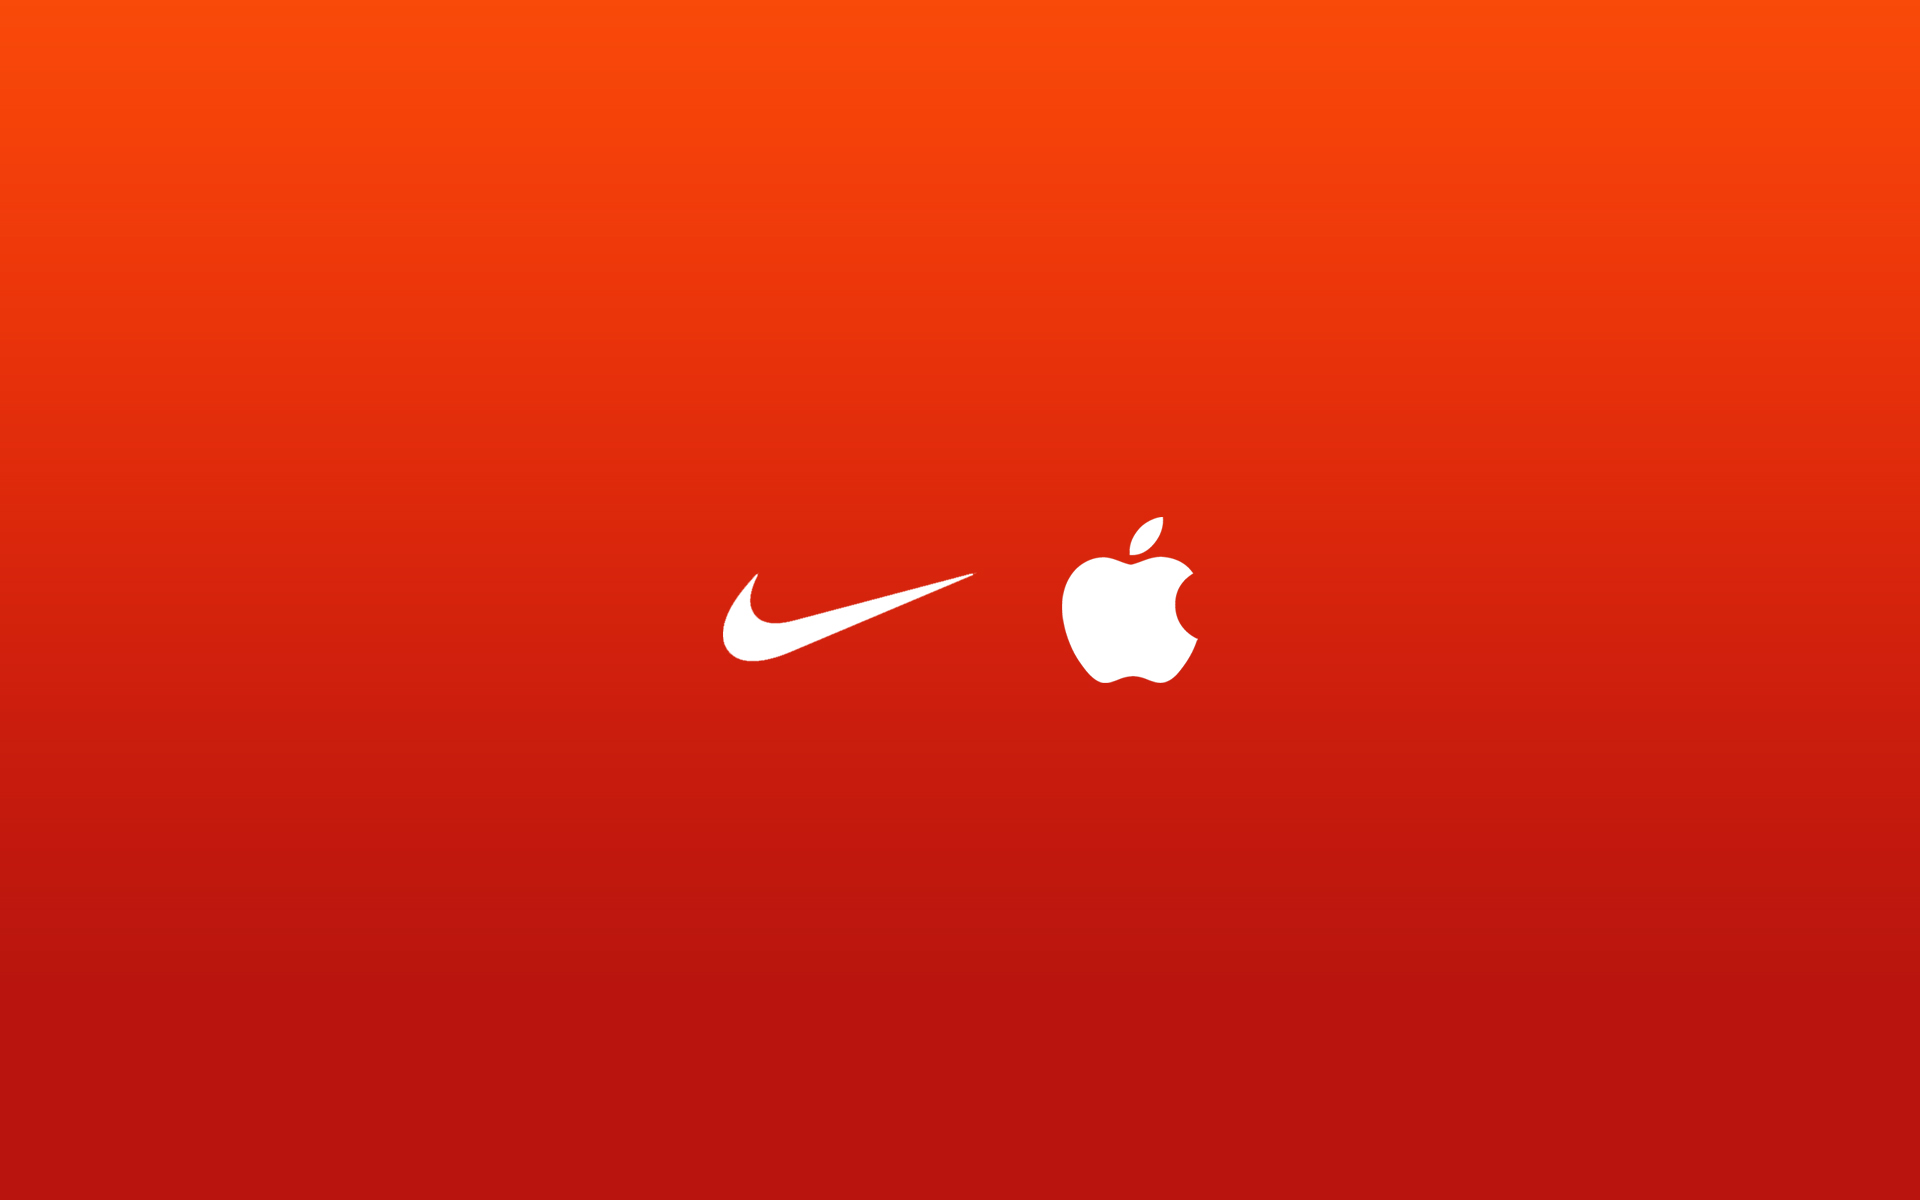 Nike + iPod Wallpaper - Gallery - Wallpapers For All